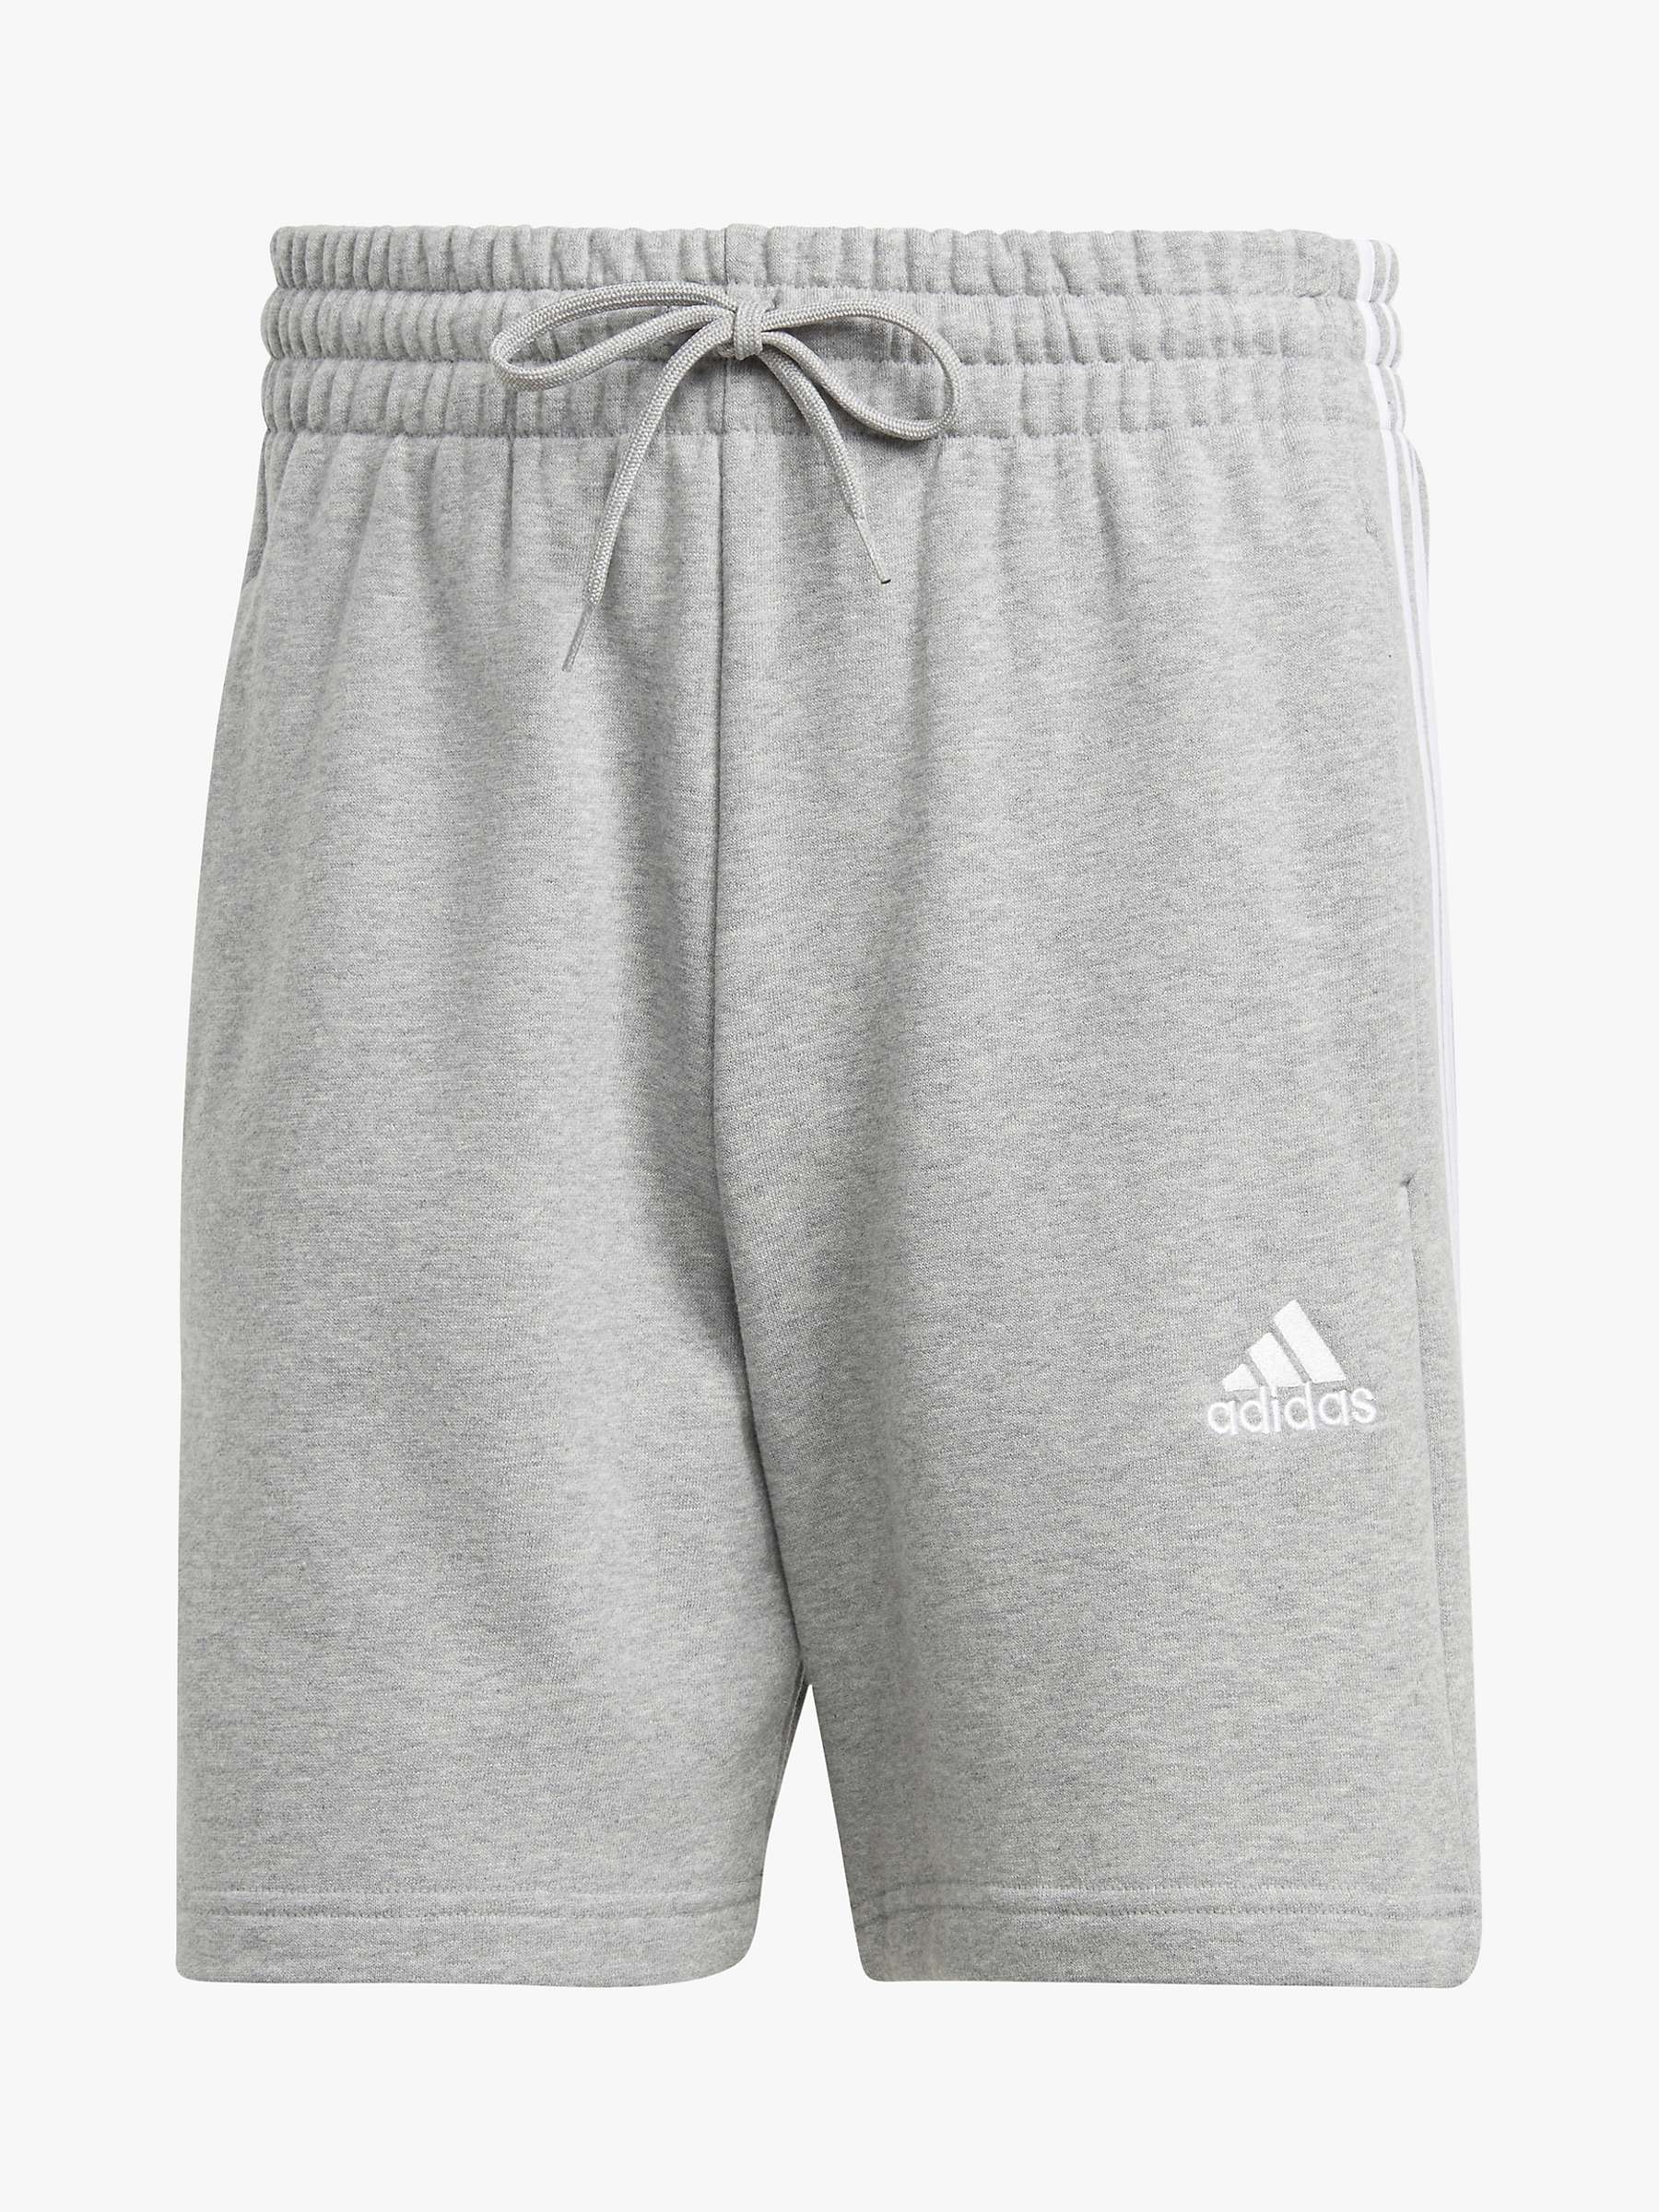 Buy adidas French Terry 3-Stripes Shorts Online at johnlewis.com